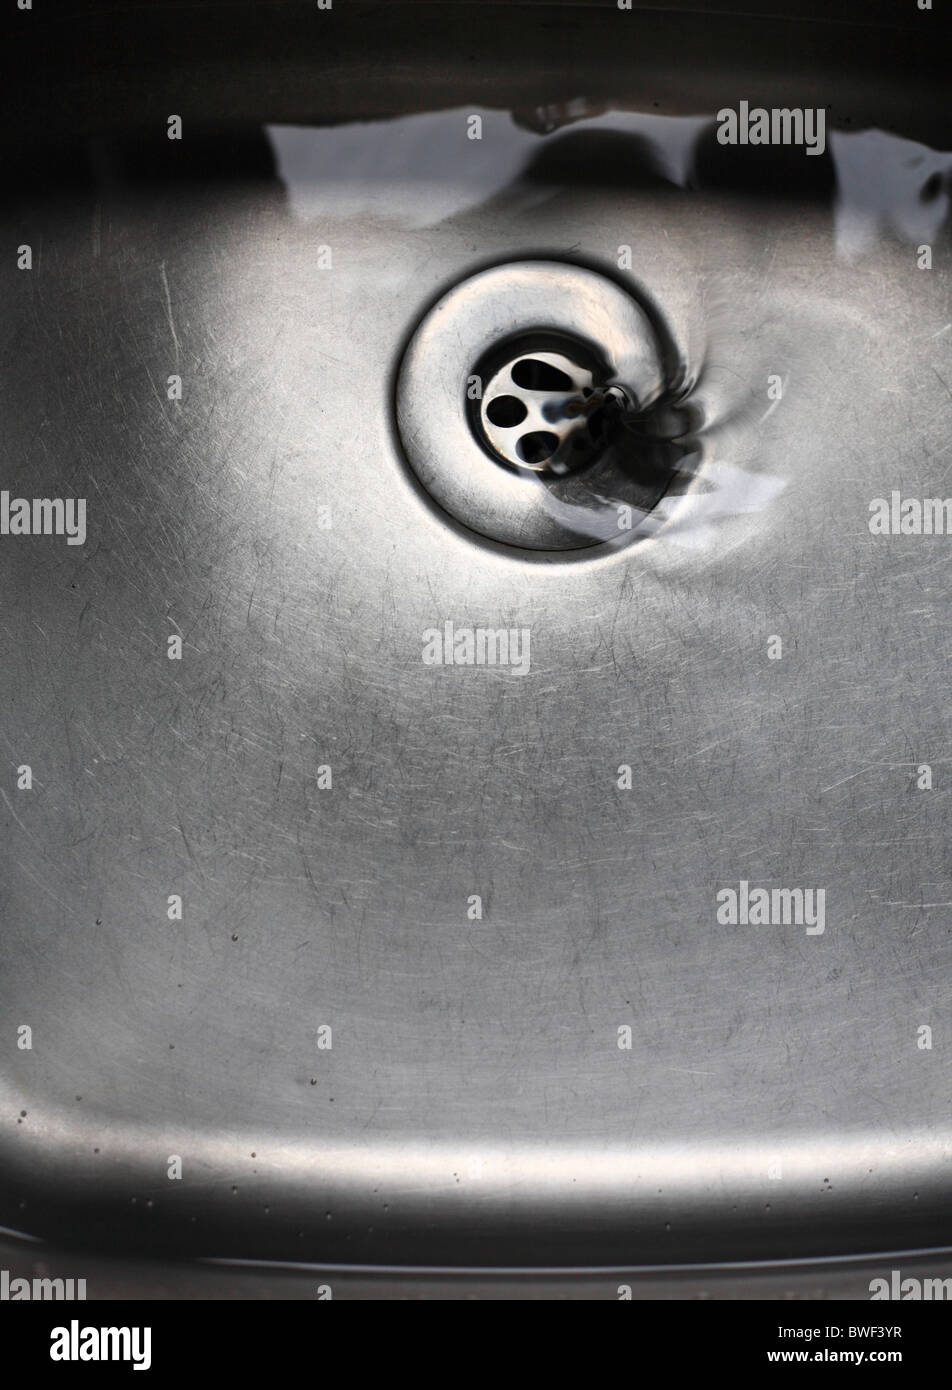 Water disappearing down the plug hole in a sink. Stock Photo